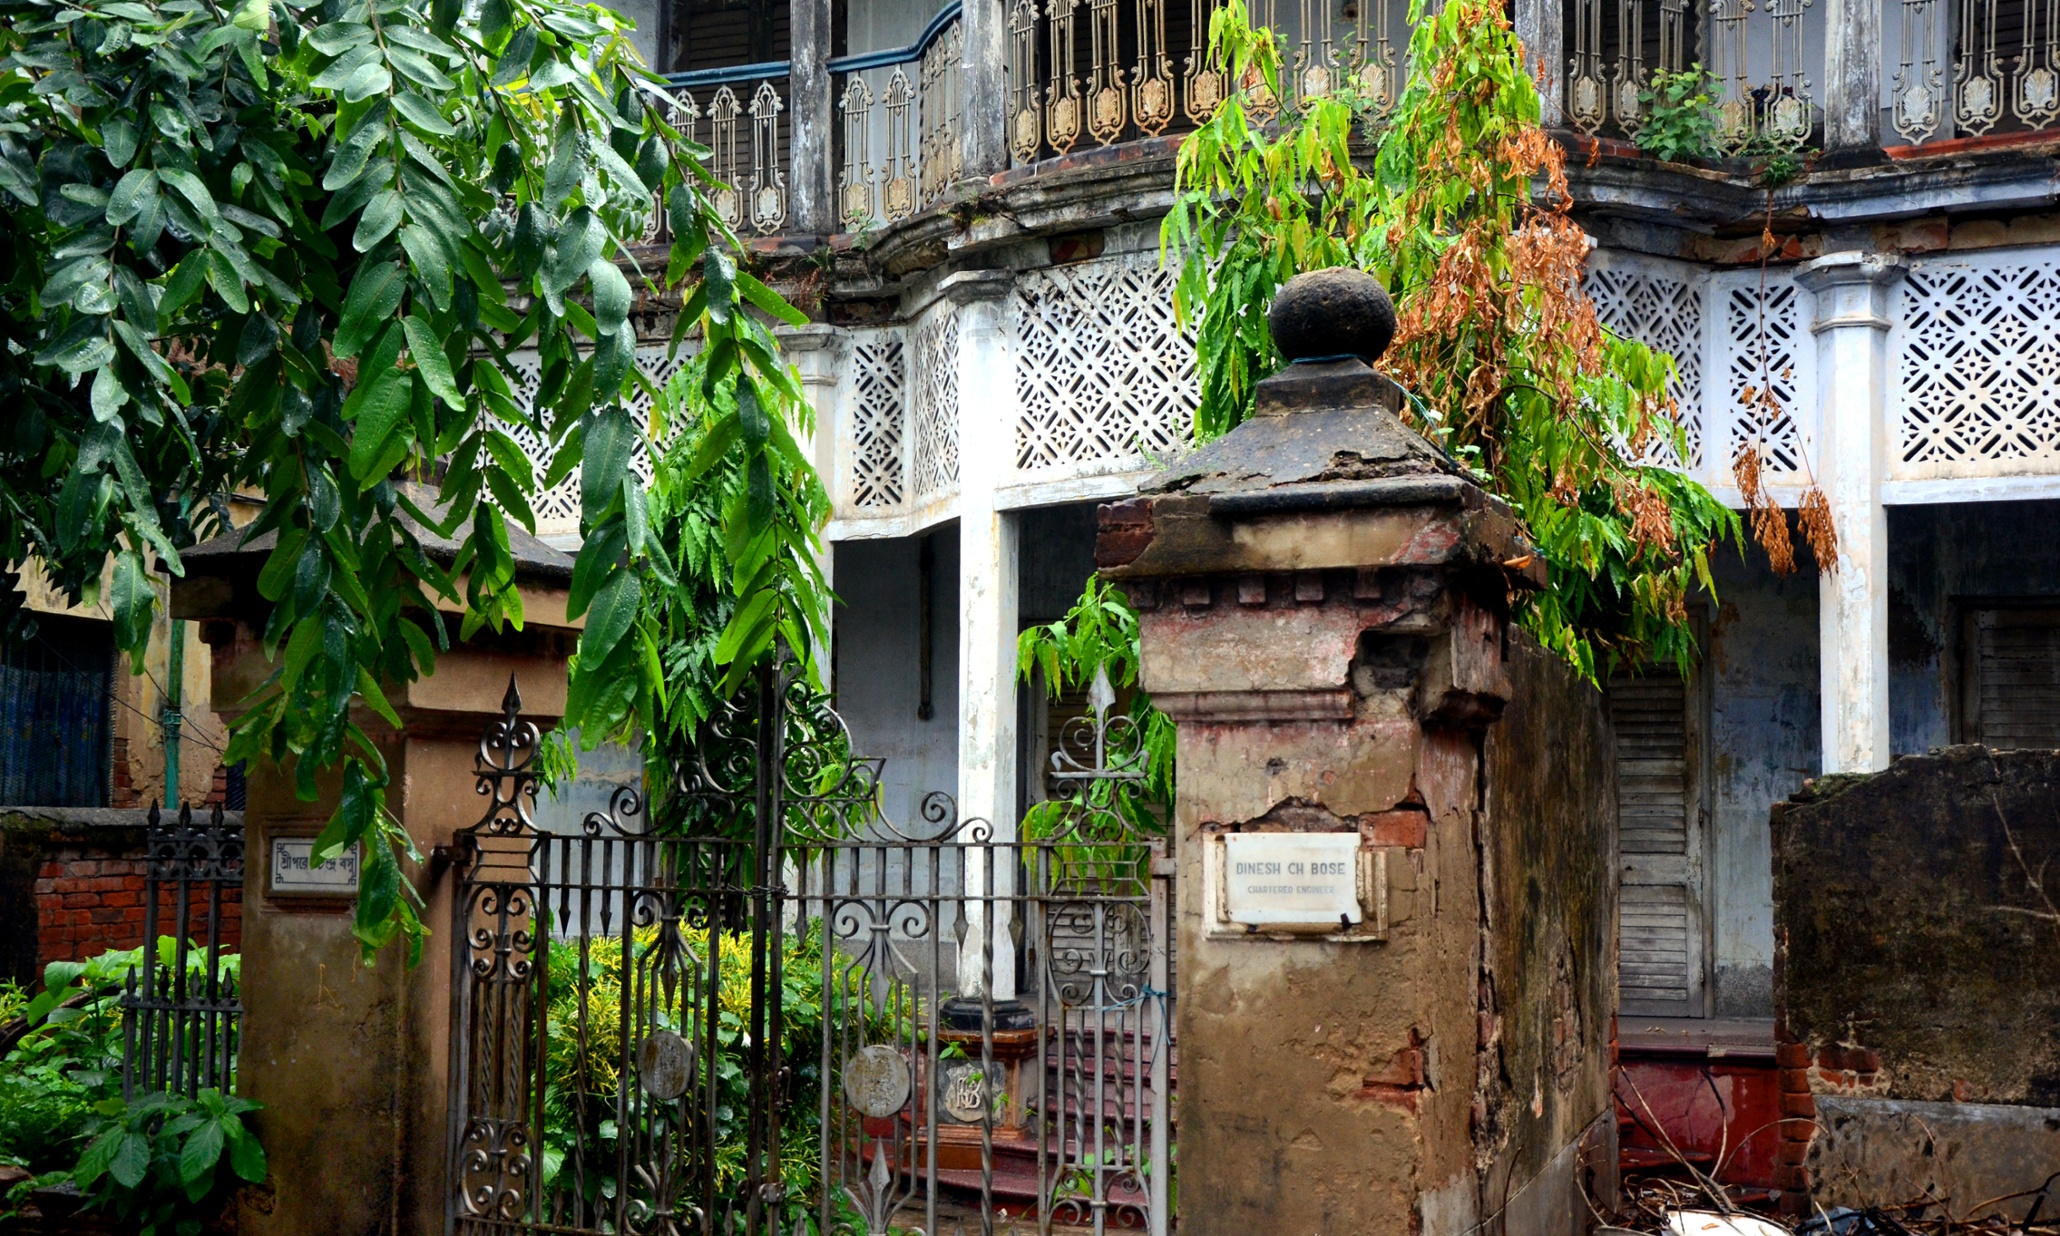 Calcutta's architecture is unique. Its destruction is a disaster for